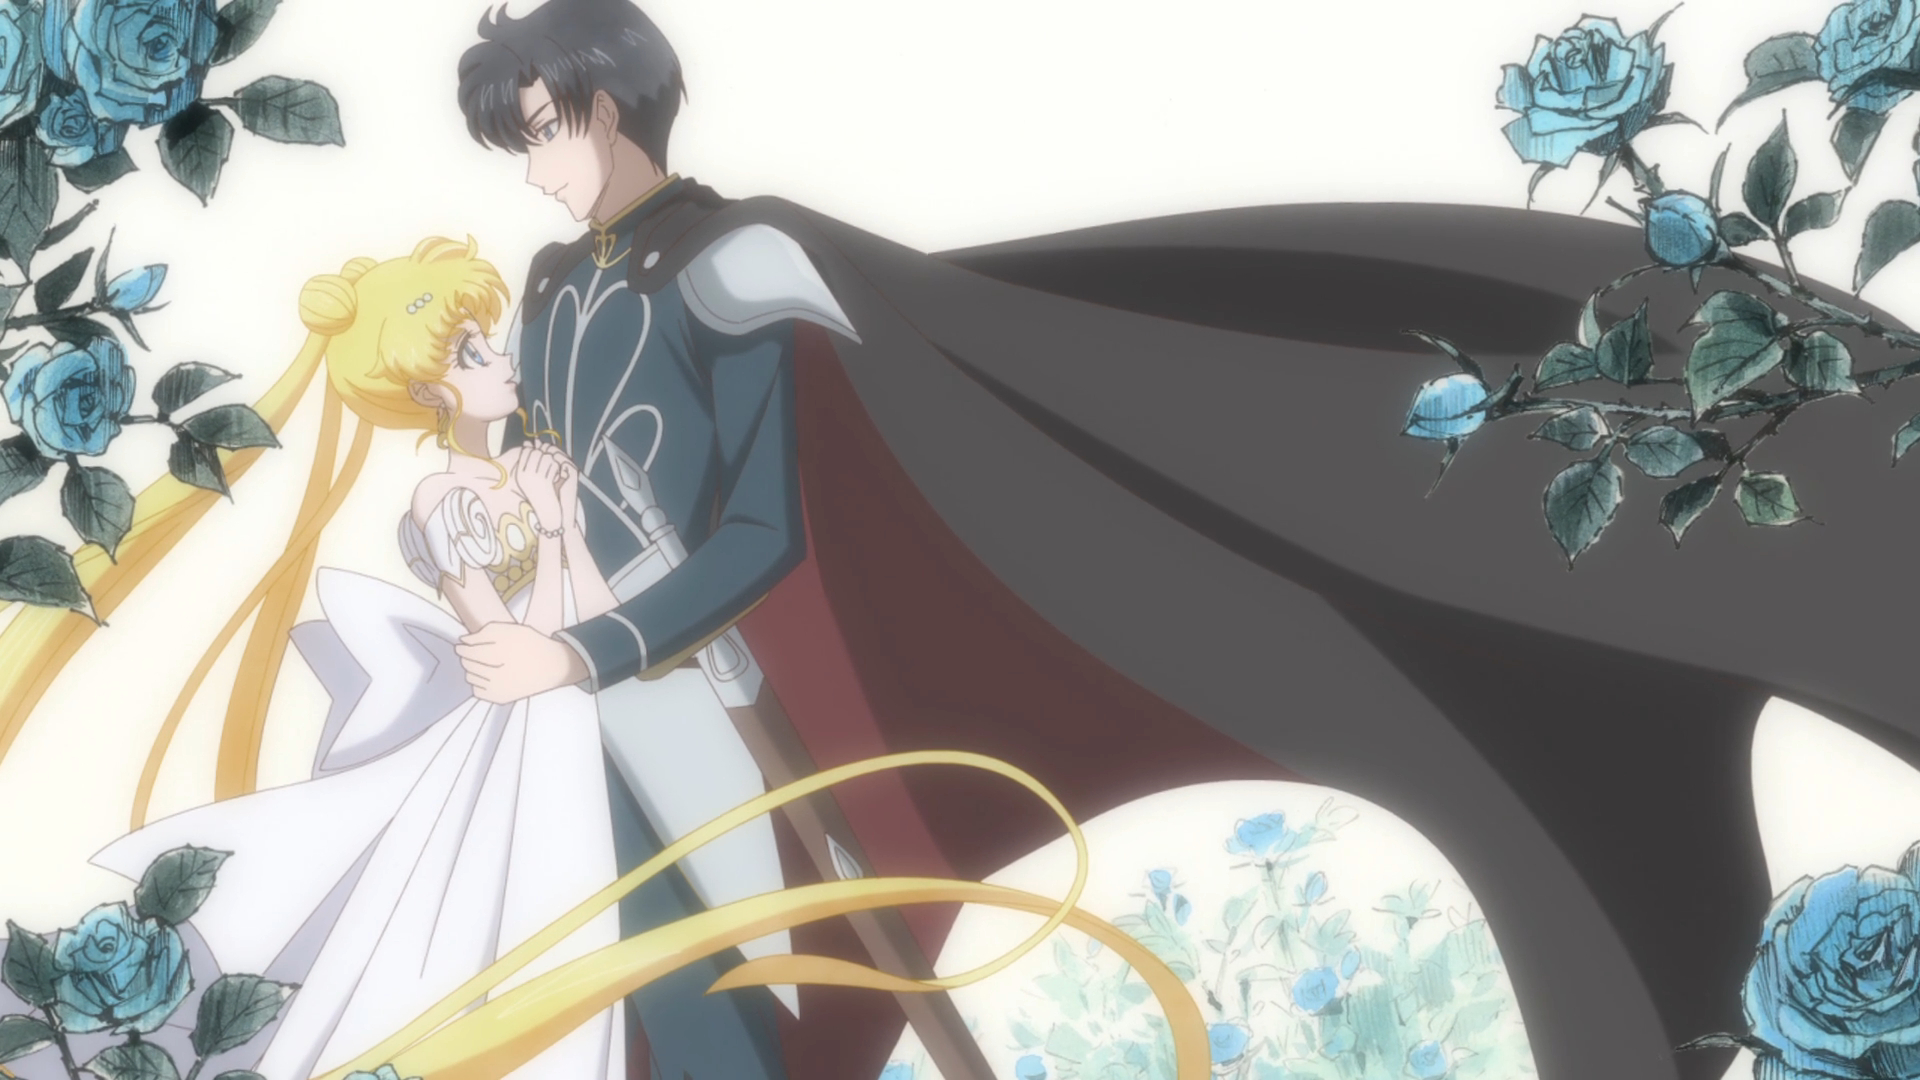 1920x1080 Review: Sailor Moon Crystal Episode 10: M